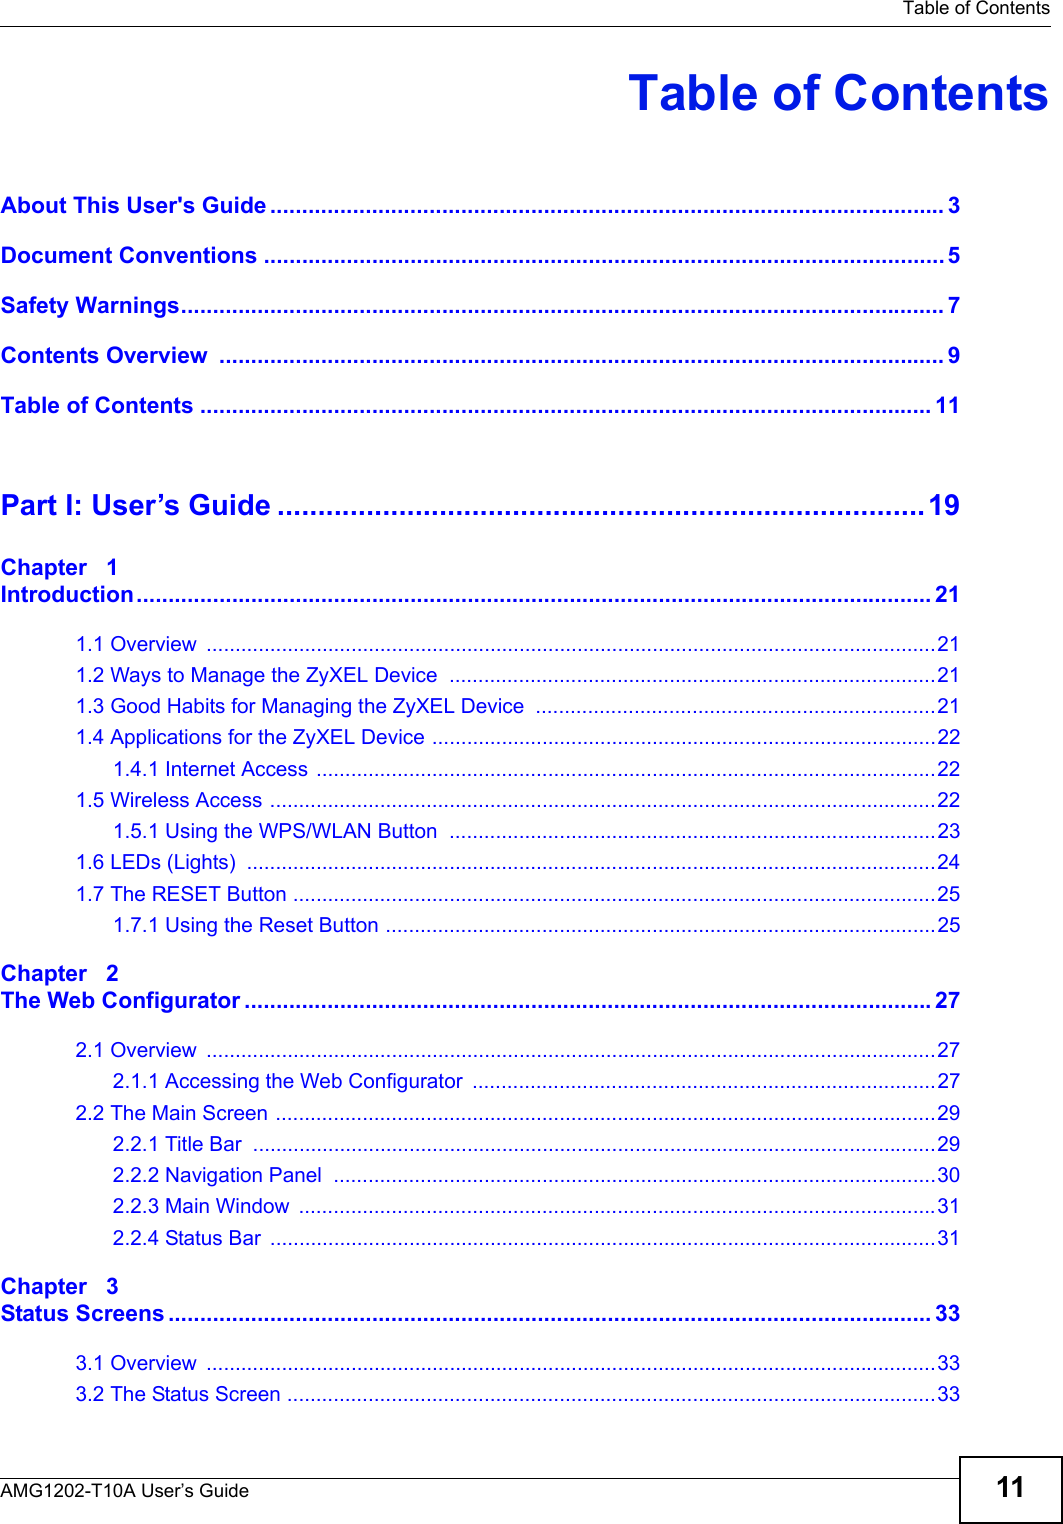   Table of ContentsAMG1202-T10A User’s Guide 11Table of ContentsAbout This User&apos;s Guide .......................................................................................................... 3Document Conventions ...........................................................................................................5Safety Warnings........................................................................................................................ 7Contents Overview  .................................................................................................................. 9Table of Contents ................................................................................................................... 11Part I: User’s Guide ................................................................................19Chapter   1Introduction............................................................................................................................. 211.1 Overview  ..............................................................................................................................211.2 Ways to Manage the ZyXEL Device  ....................................................................................211.3 Good Habits for Managing the ZyXEL Device  .....................................................................211.4 Applications for the ZyXEL Device .......................................................................................221.4.1 Internet Access ...........................................................................................................221.5 Wireless Access ...................................................................................................................221.5.1 Using the WPS/WLAN Button  ....................................................................................231.6 LEDs (Lights)  .......................................................................................................................241.7 The RESET Button ...............................................................................................................251.7.1 Using the Reset Button ...............................................................................................25Chapter   2The Web Configurator ............................................................................................................272.1 Overview  ..............................................................................................................................272.1.1 Accessing the Web Configurator  ................................................................................272.2 The Main Screen ..................................................................................................................292.2.1 Title Bar  ......................................................................................................................292.2.2 Navigation Panel  ........................................................................................................302.2.3 Main Window  ..............................................................................................................312.2.4 Status Bar  ...................................................................................................................31Chapter   3Status Screens ........................................................................................................................ 333.1 Overview  ..............................................................................................................................333.2 The Status Screen ................................................................................................................33